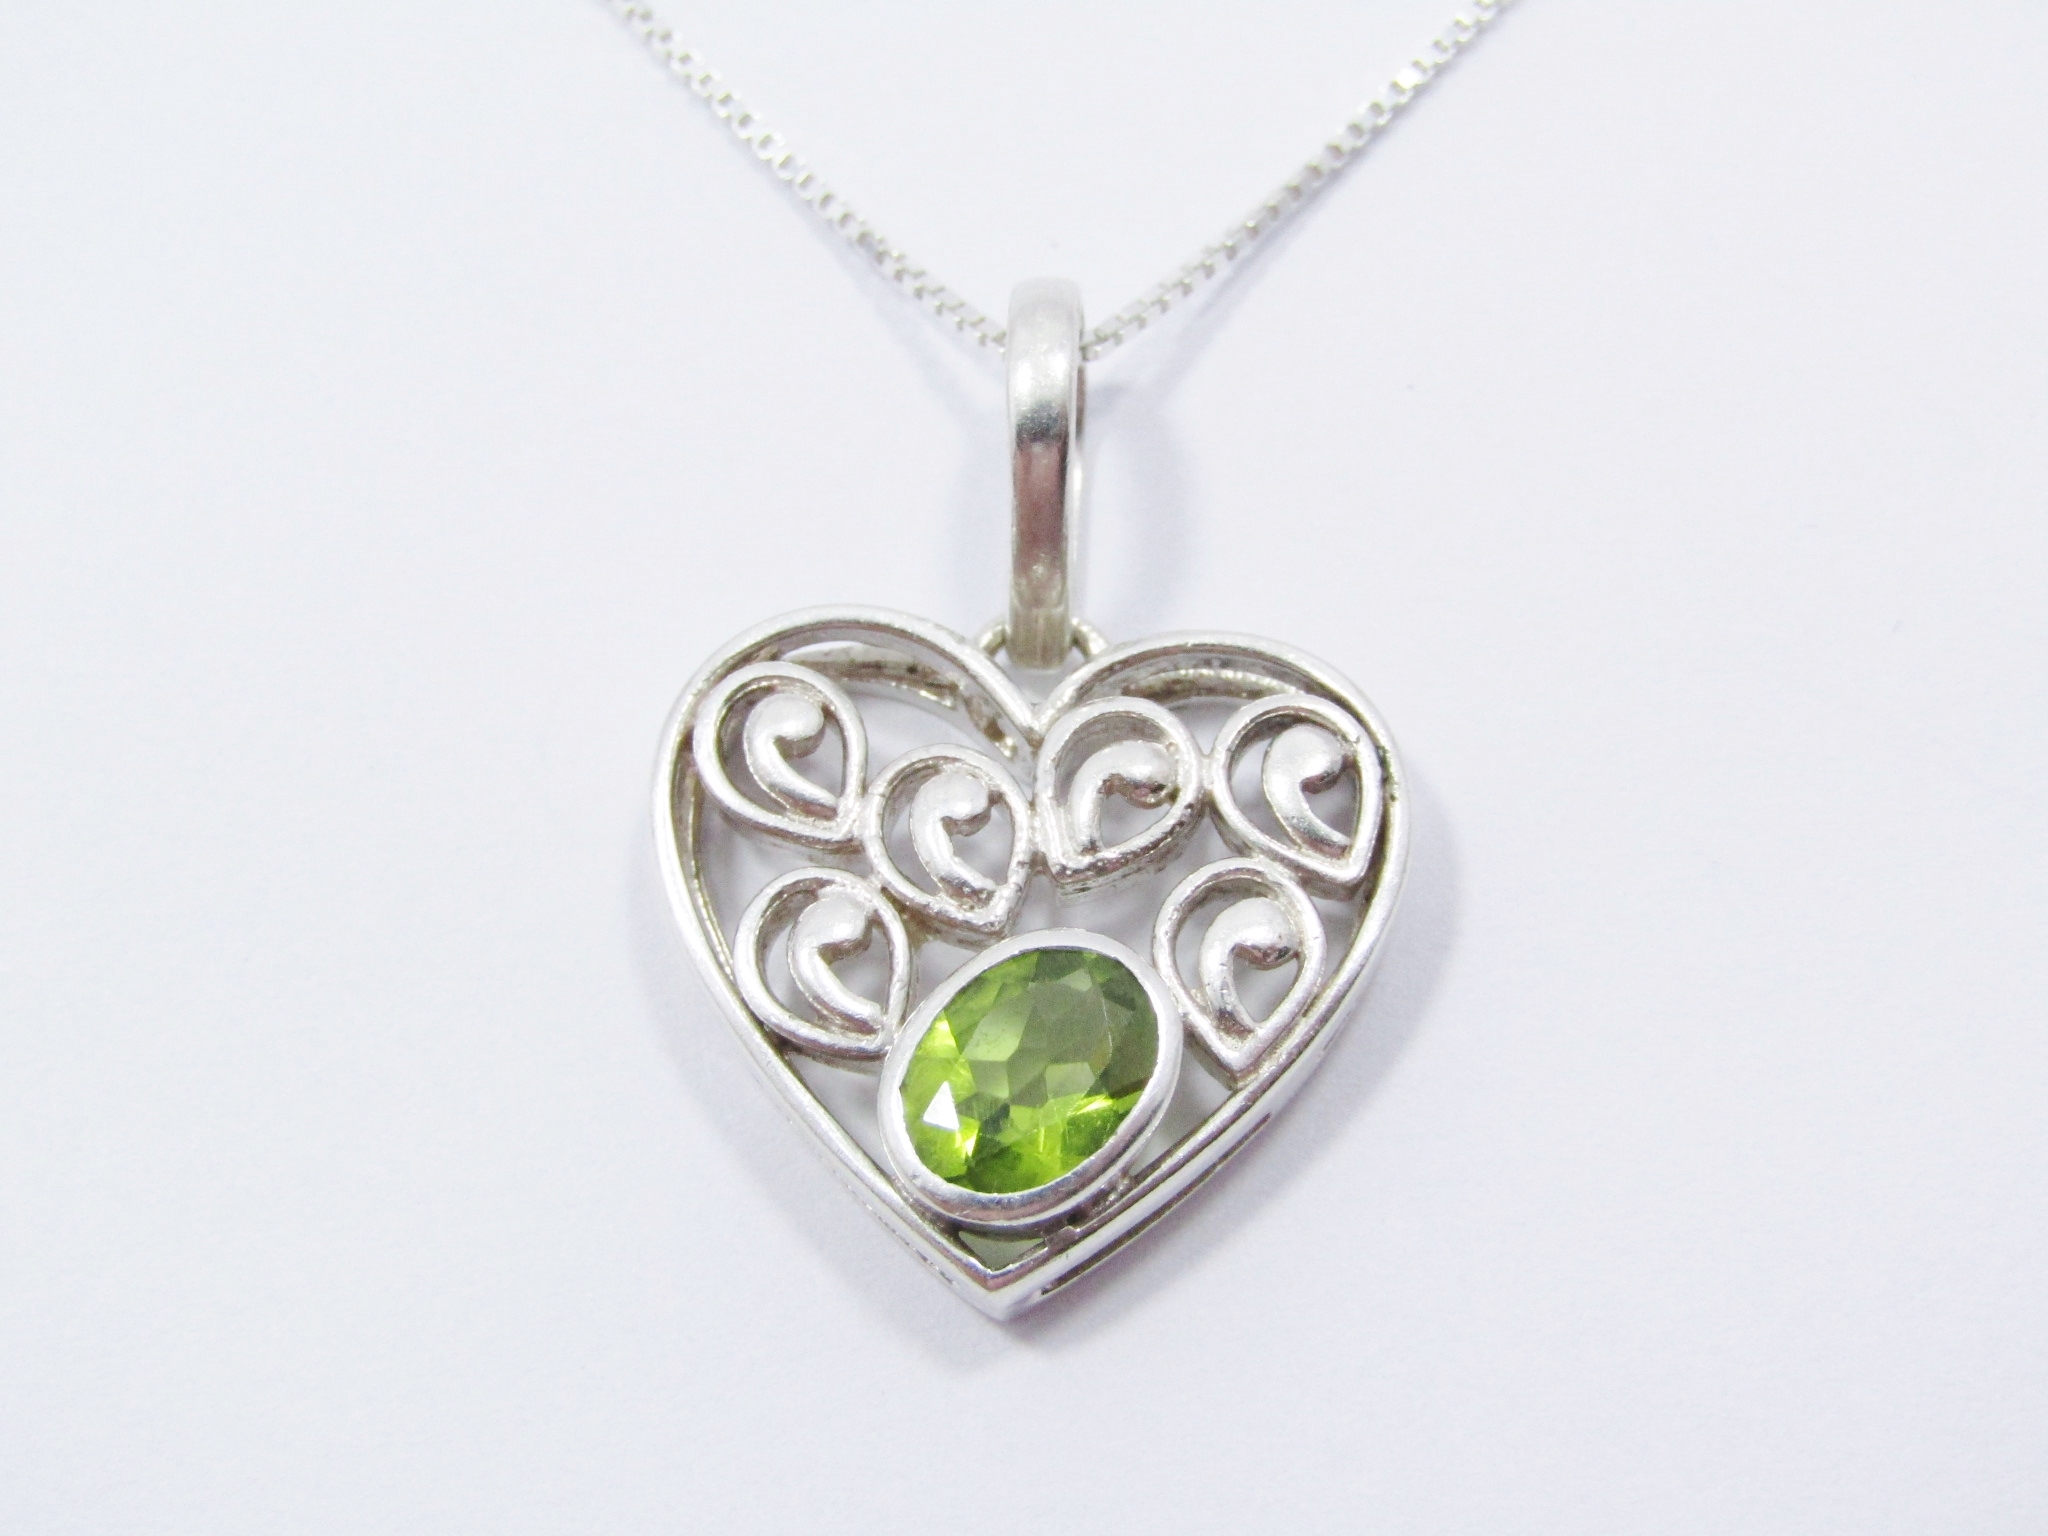 A Lovely Zirconia Heart Pendant on Chain in Sterling Silver.